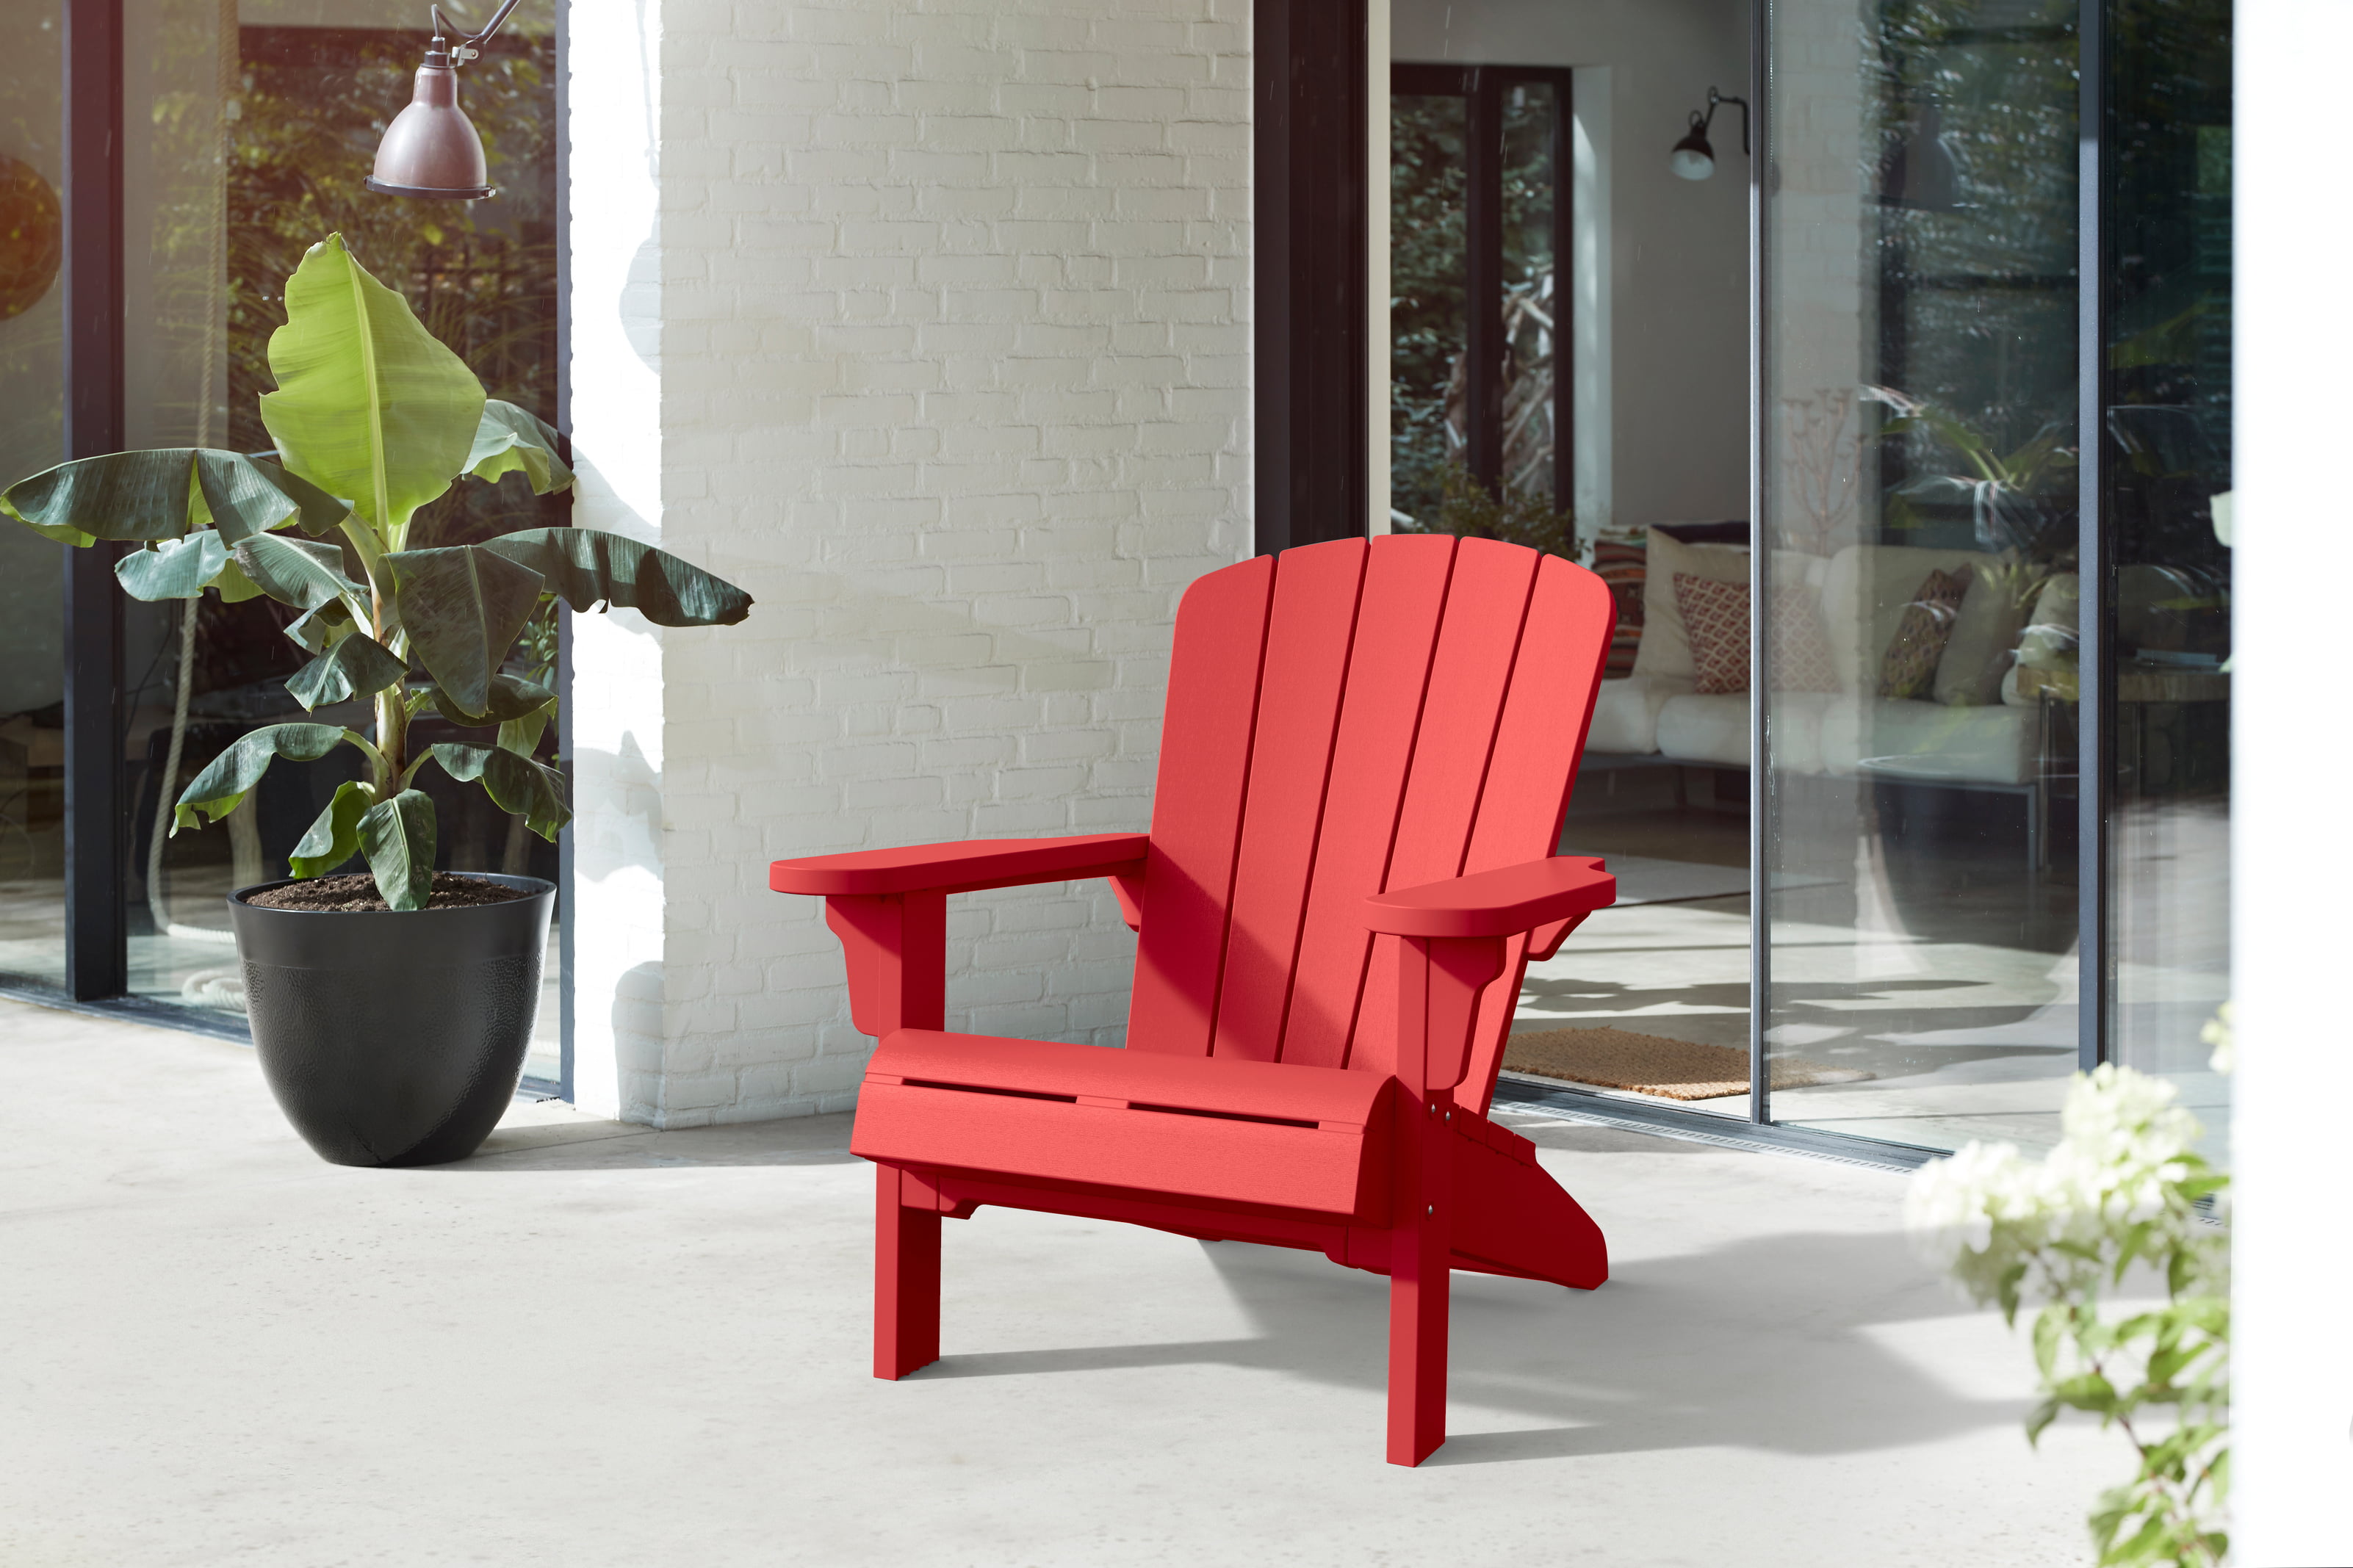 Keter Adirondack Resin Outdoor Chair (Various Colors) - $59.99 + Free Shipping